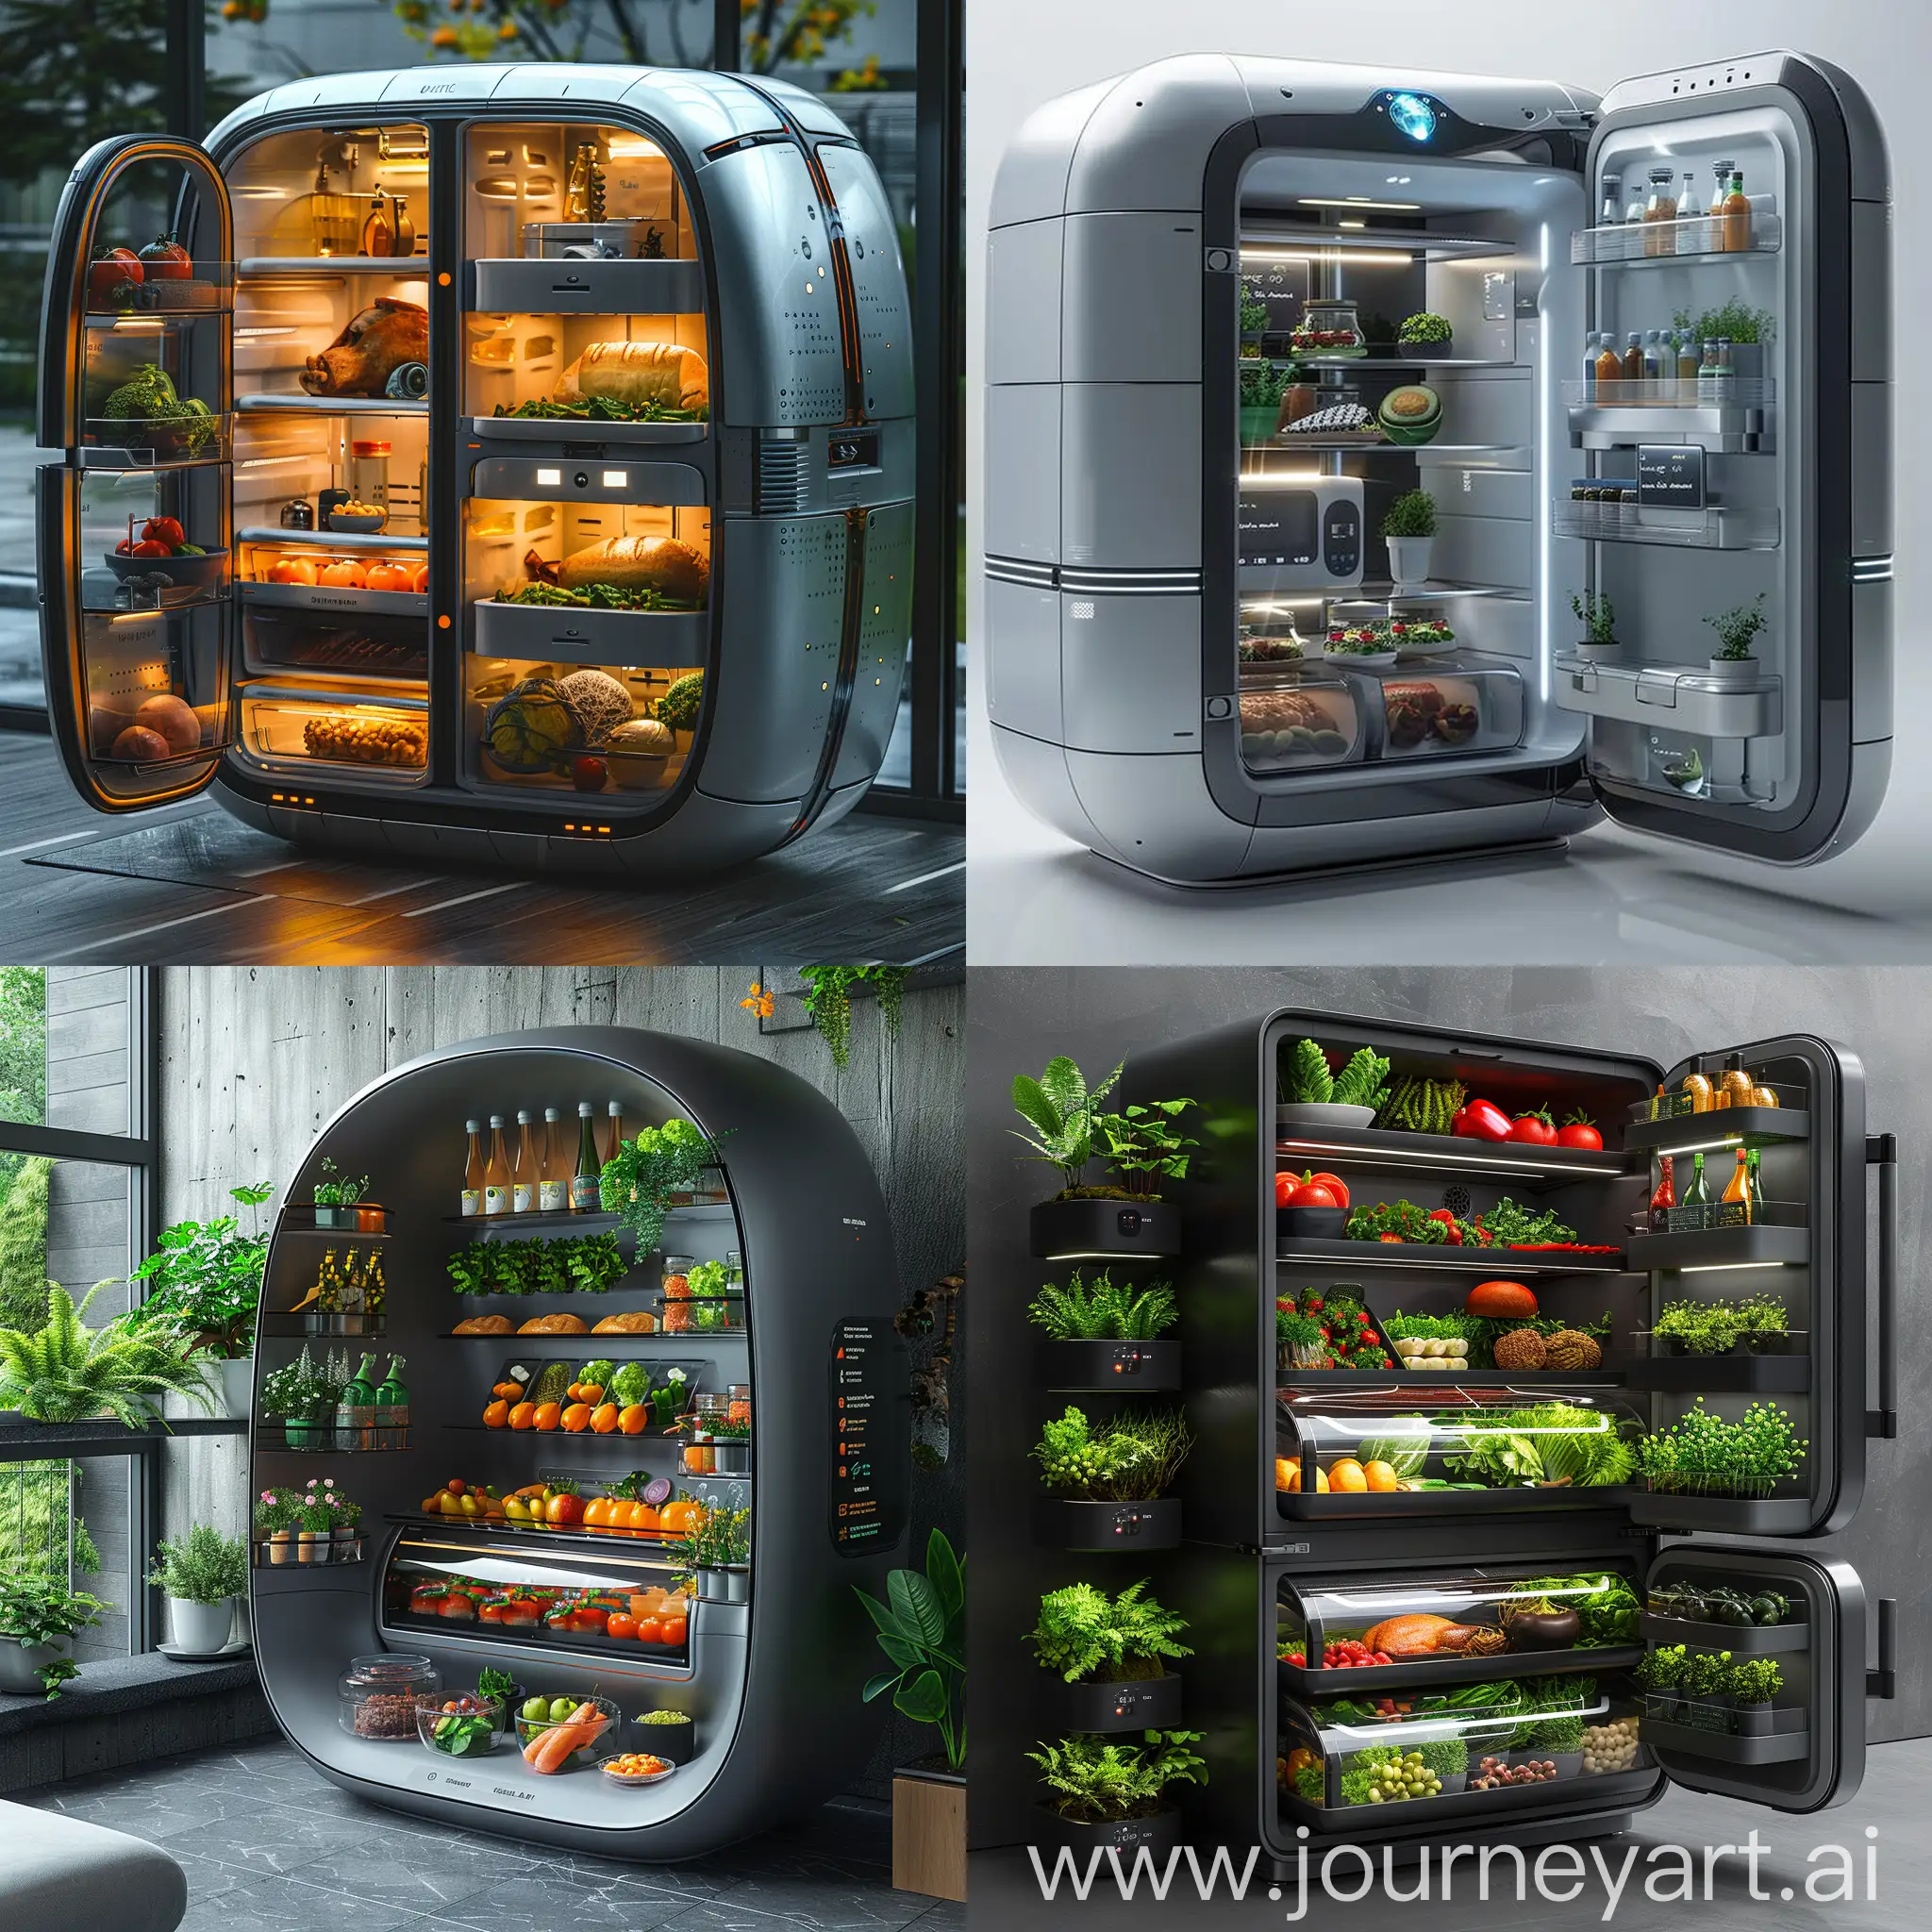 Futuristic fridge, Smart AI Integration, Interactive Touchscreen Display, Voice Control, Self-Inventory Management, Built-in Cameras, Temperature Zones, Automatic Food Recognition, Self-Cleaning Function, Energy-Efficient Design, Modular Design, Energy Star Certified, Solar Power Compatibility, Solar Power Compatibility, Recyclable Materials, Low Emission Refrigerants, Hydrocarbon Cooling, Water Filtration System, Compost Bin, Minimal Packaging, Minimal Packaging, Self-Healing Surfaces, Nano-Enhanced Insulation, Antibacterial Coating, Nano-Sensors, Nano-Filtration System, Nano-Enhanced Food Preservation, Nano-Photovoltaic Cells, Nano-Enabled Smart Labels, Nanostructured Surfaces, Nanotechnology-Based Cooling System, octane render --stylize 1000